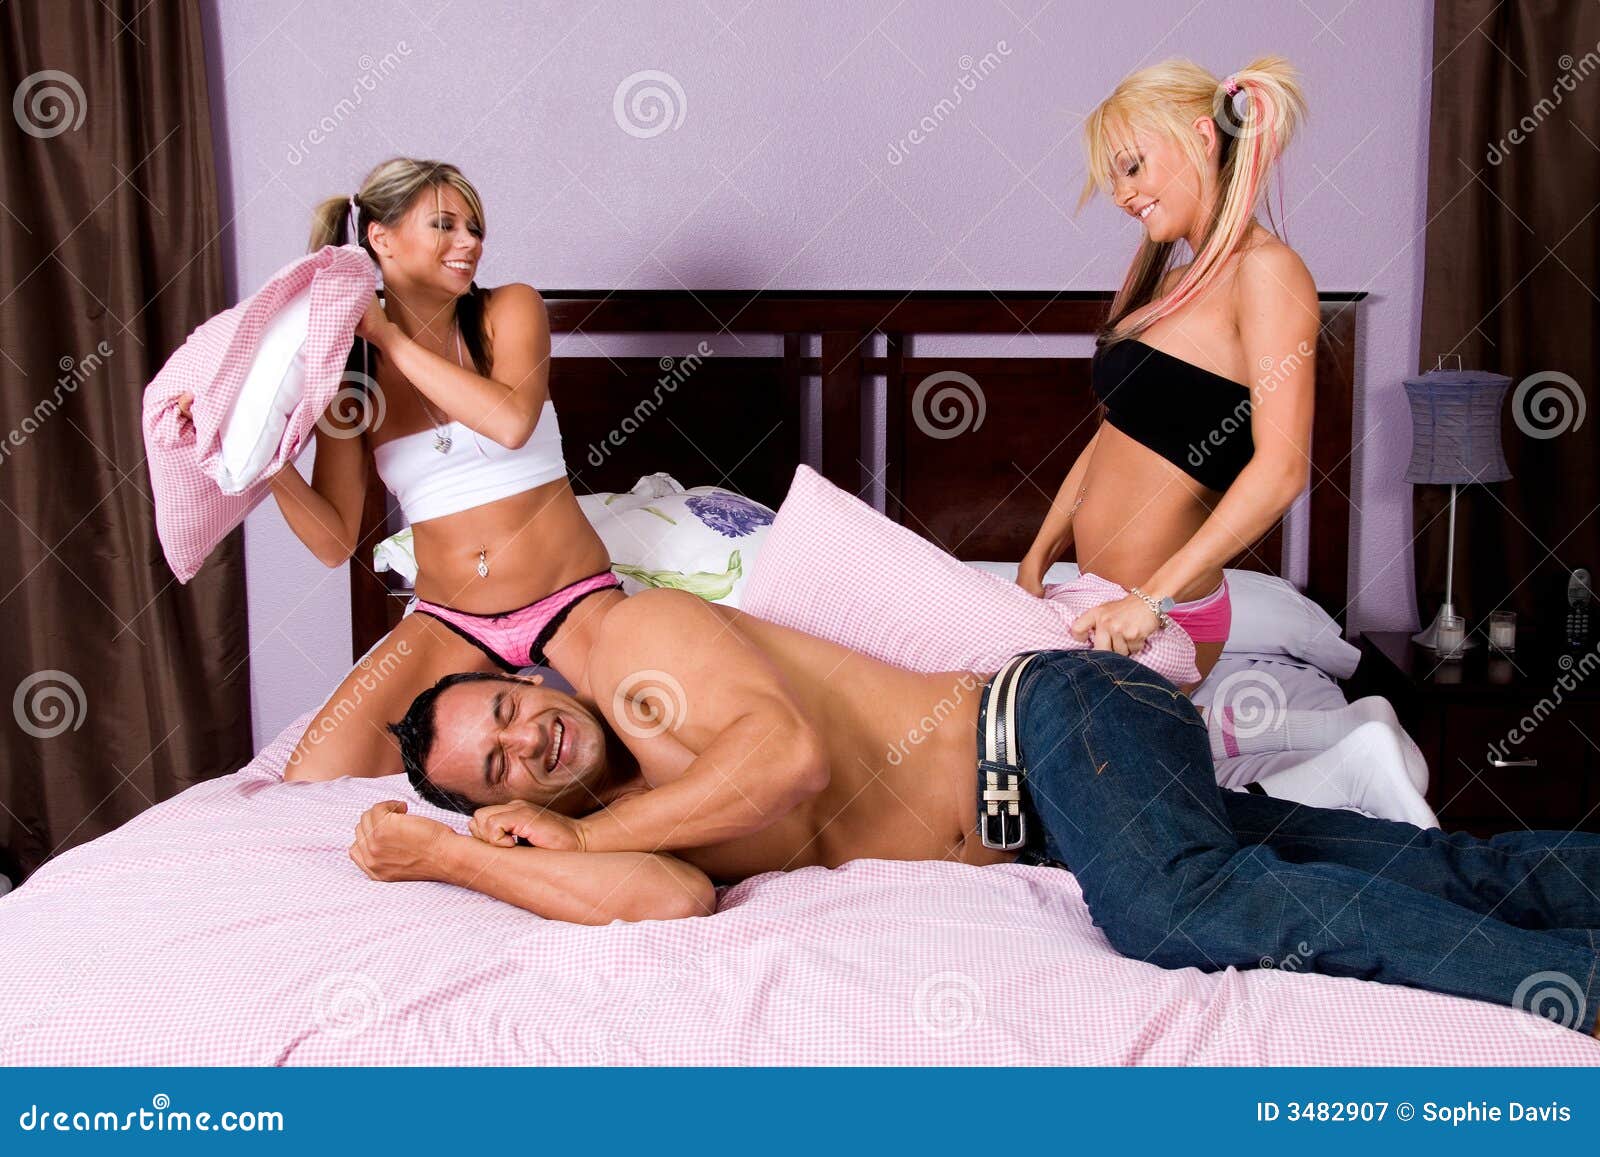 Girls in panties having a pillow fight Pillow Fight Stock Image Image Of Girly Femininity Model 3482907